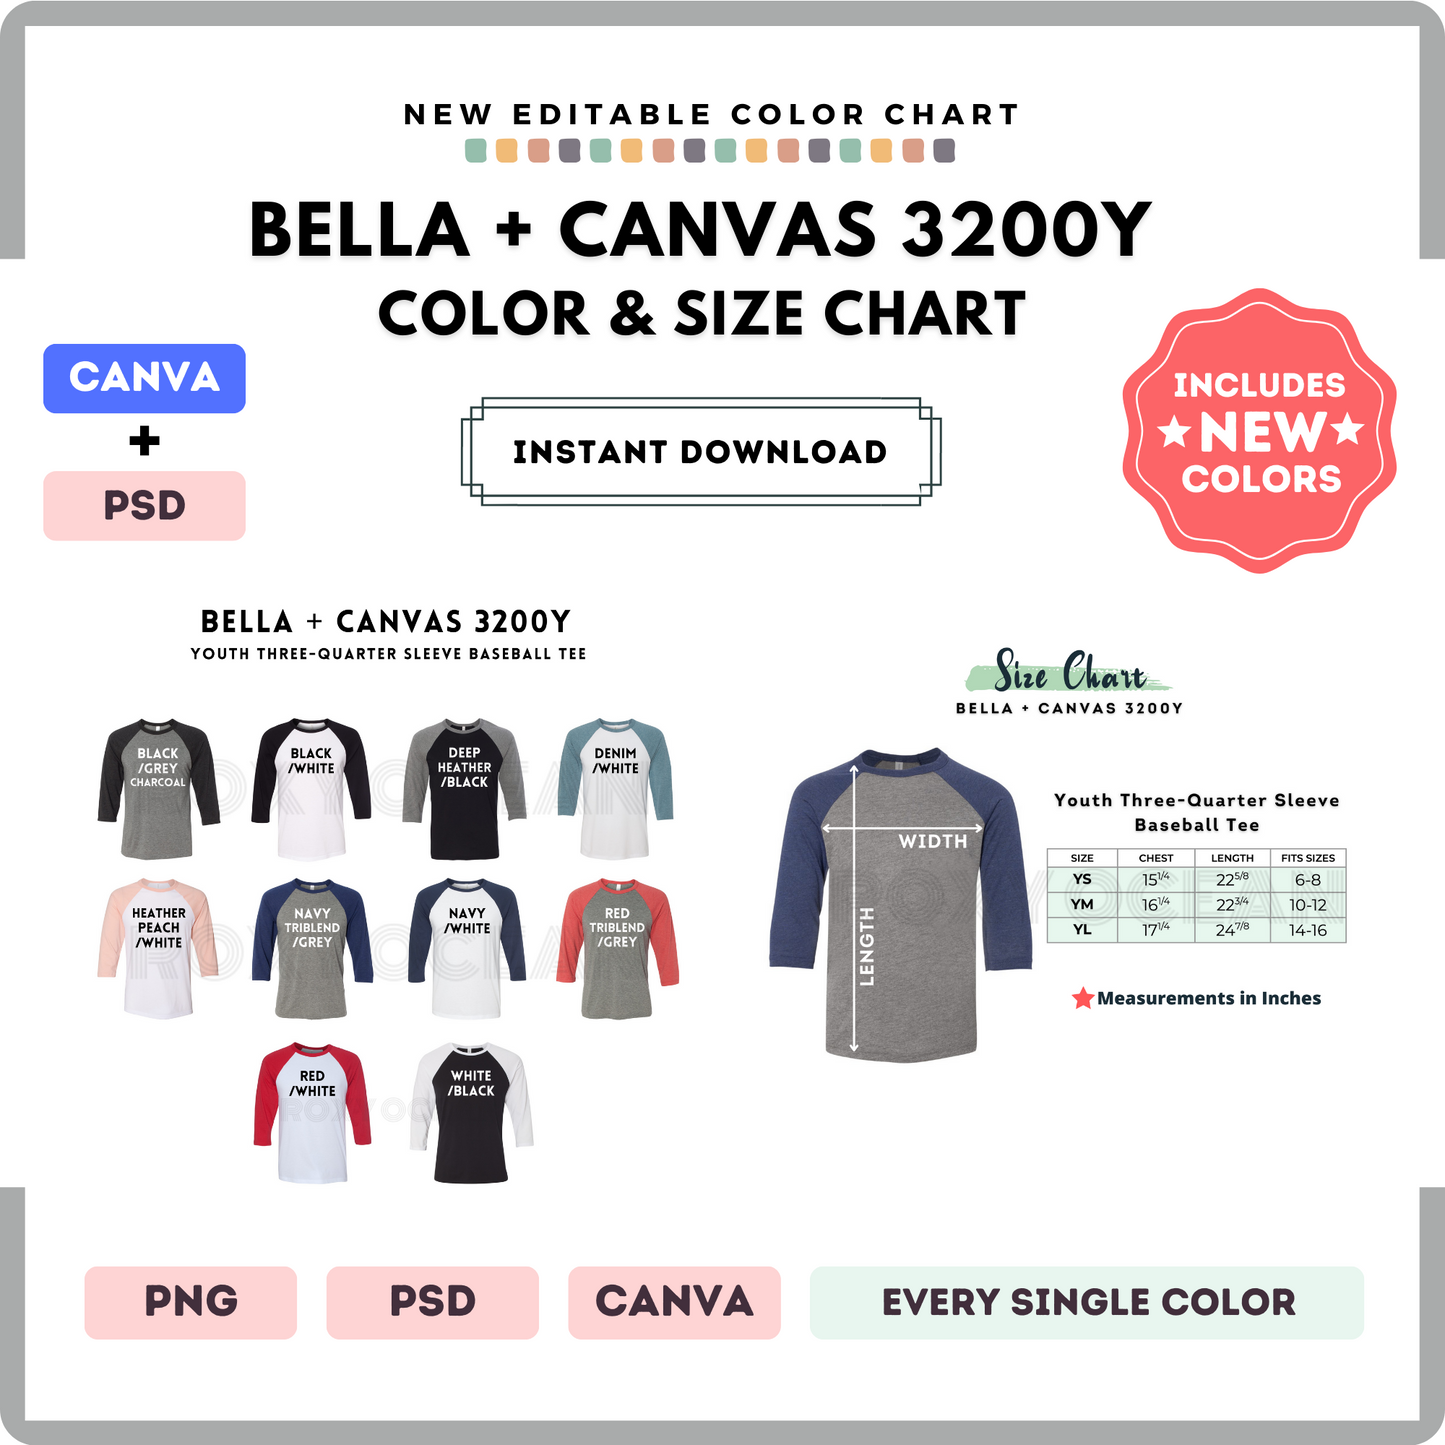 Bella Canvas 3200Y Color and Size Chart